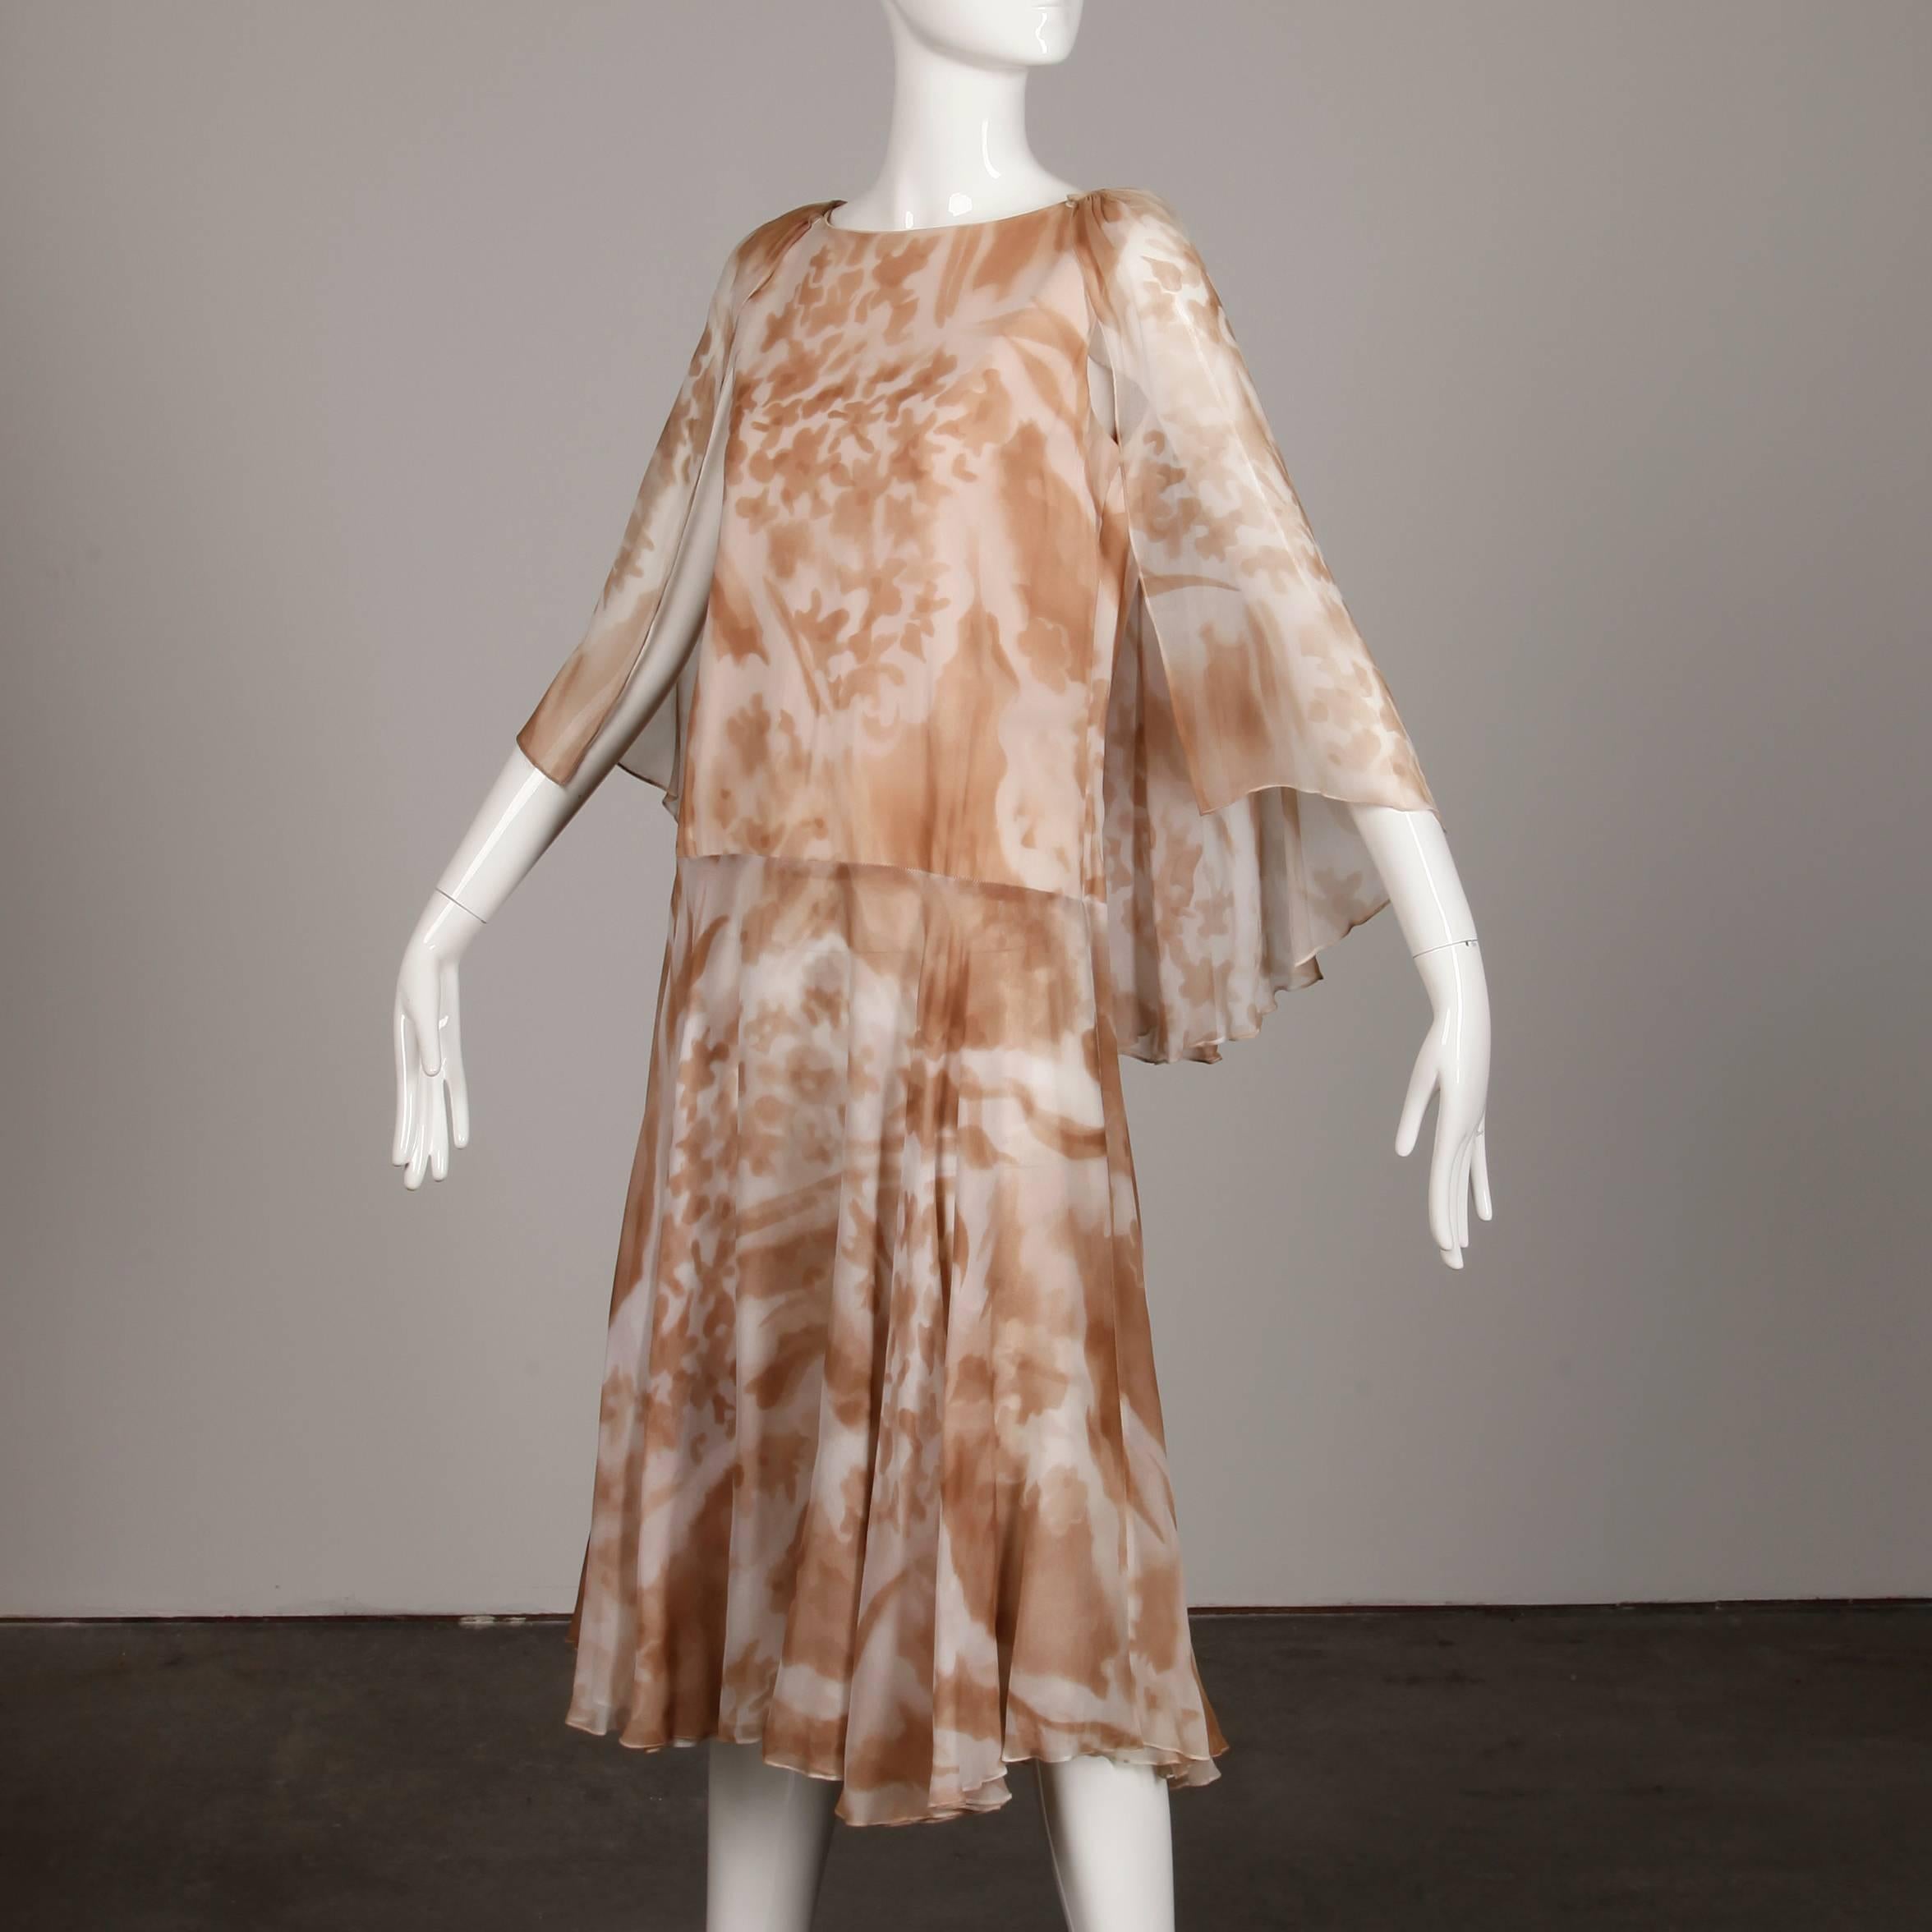 1970s Mr. Blackwell Vintage Sheer Silk Chiffon Print Dress with Detachable Cape In Excellent Condition For Sale In Sparks, NV